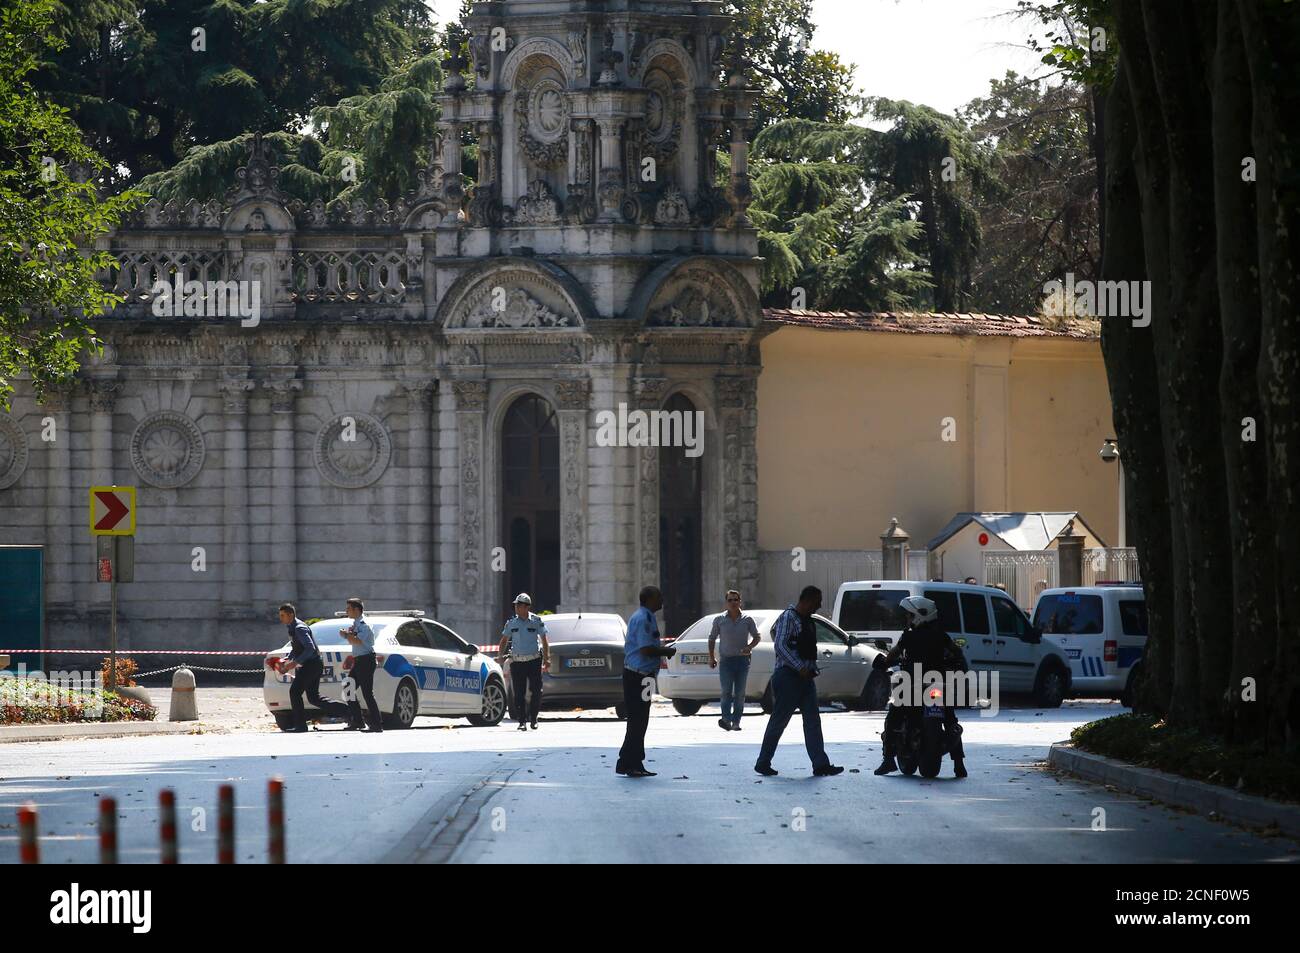 Turkish policemen examine the area after a shooting incident near the entrance to Dolmabahce Palace in Istanbul, Turkey August 19, 2015. Turkish police detained two suspects with automatic weapons after a shooting on Wednesday near the entrance to Istanbul's Dolmabahce Palace, popular with tourists and home to the prime minister's Istanbul offices, the Dogan news agency said. REUTERS/Murad Sezer Stock Photo